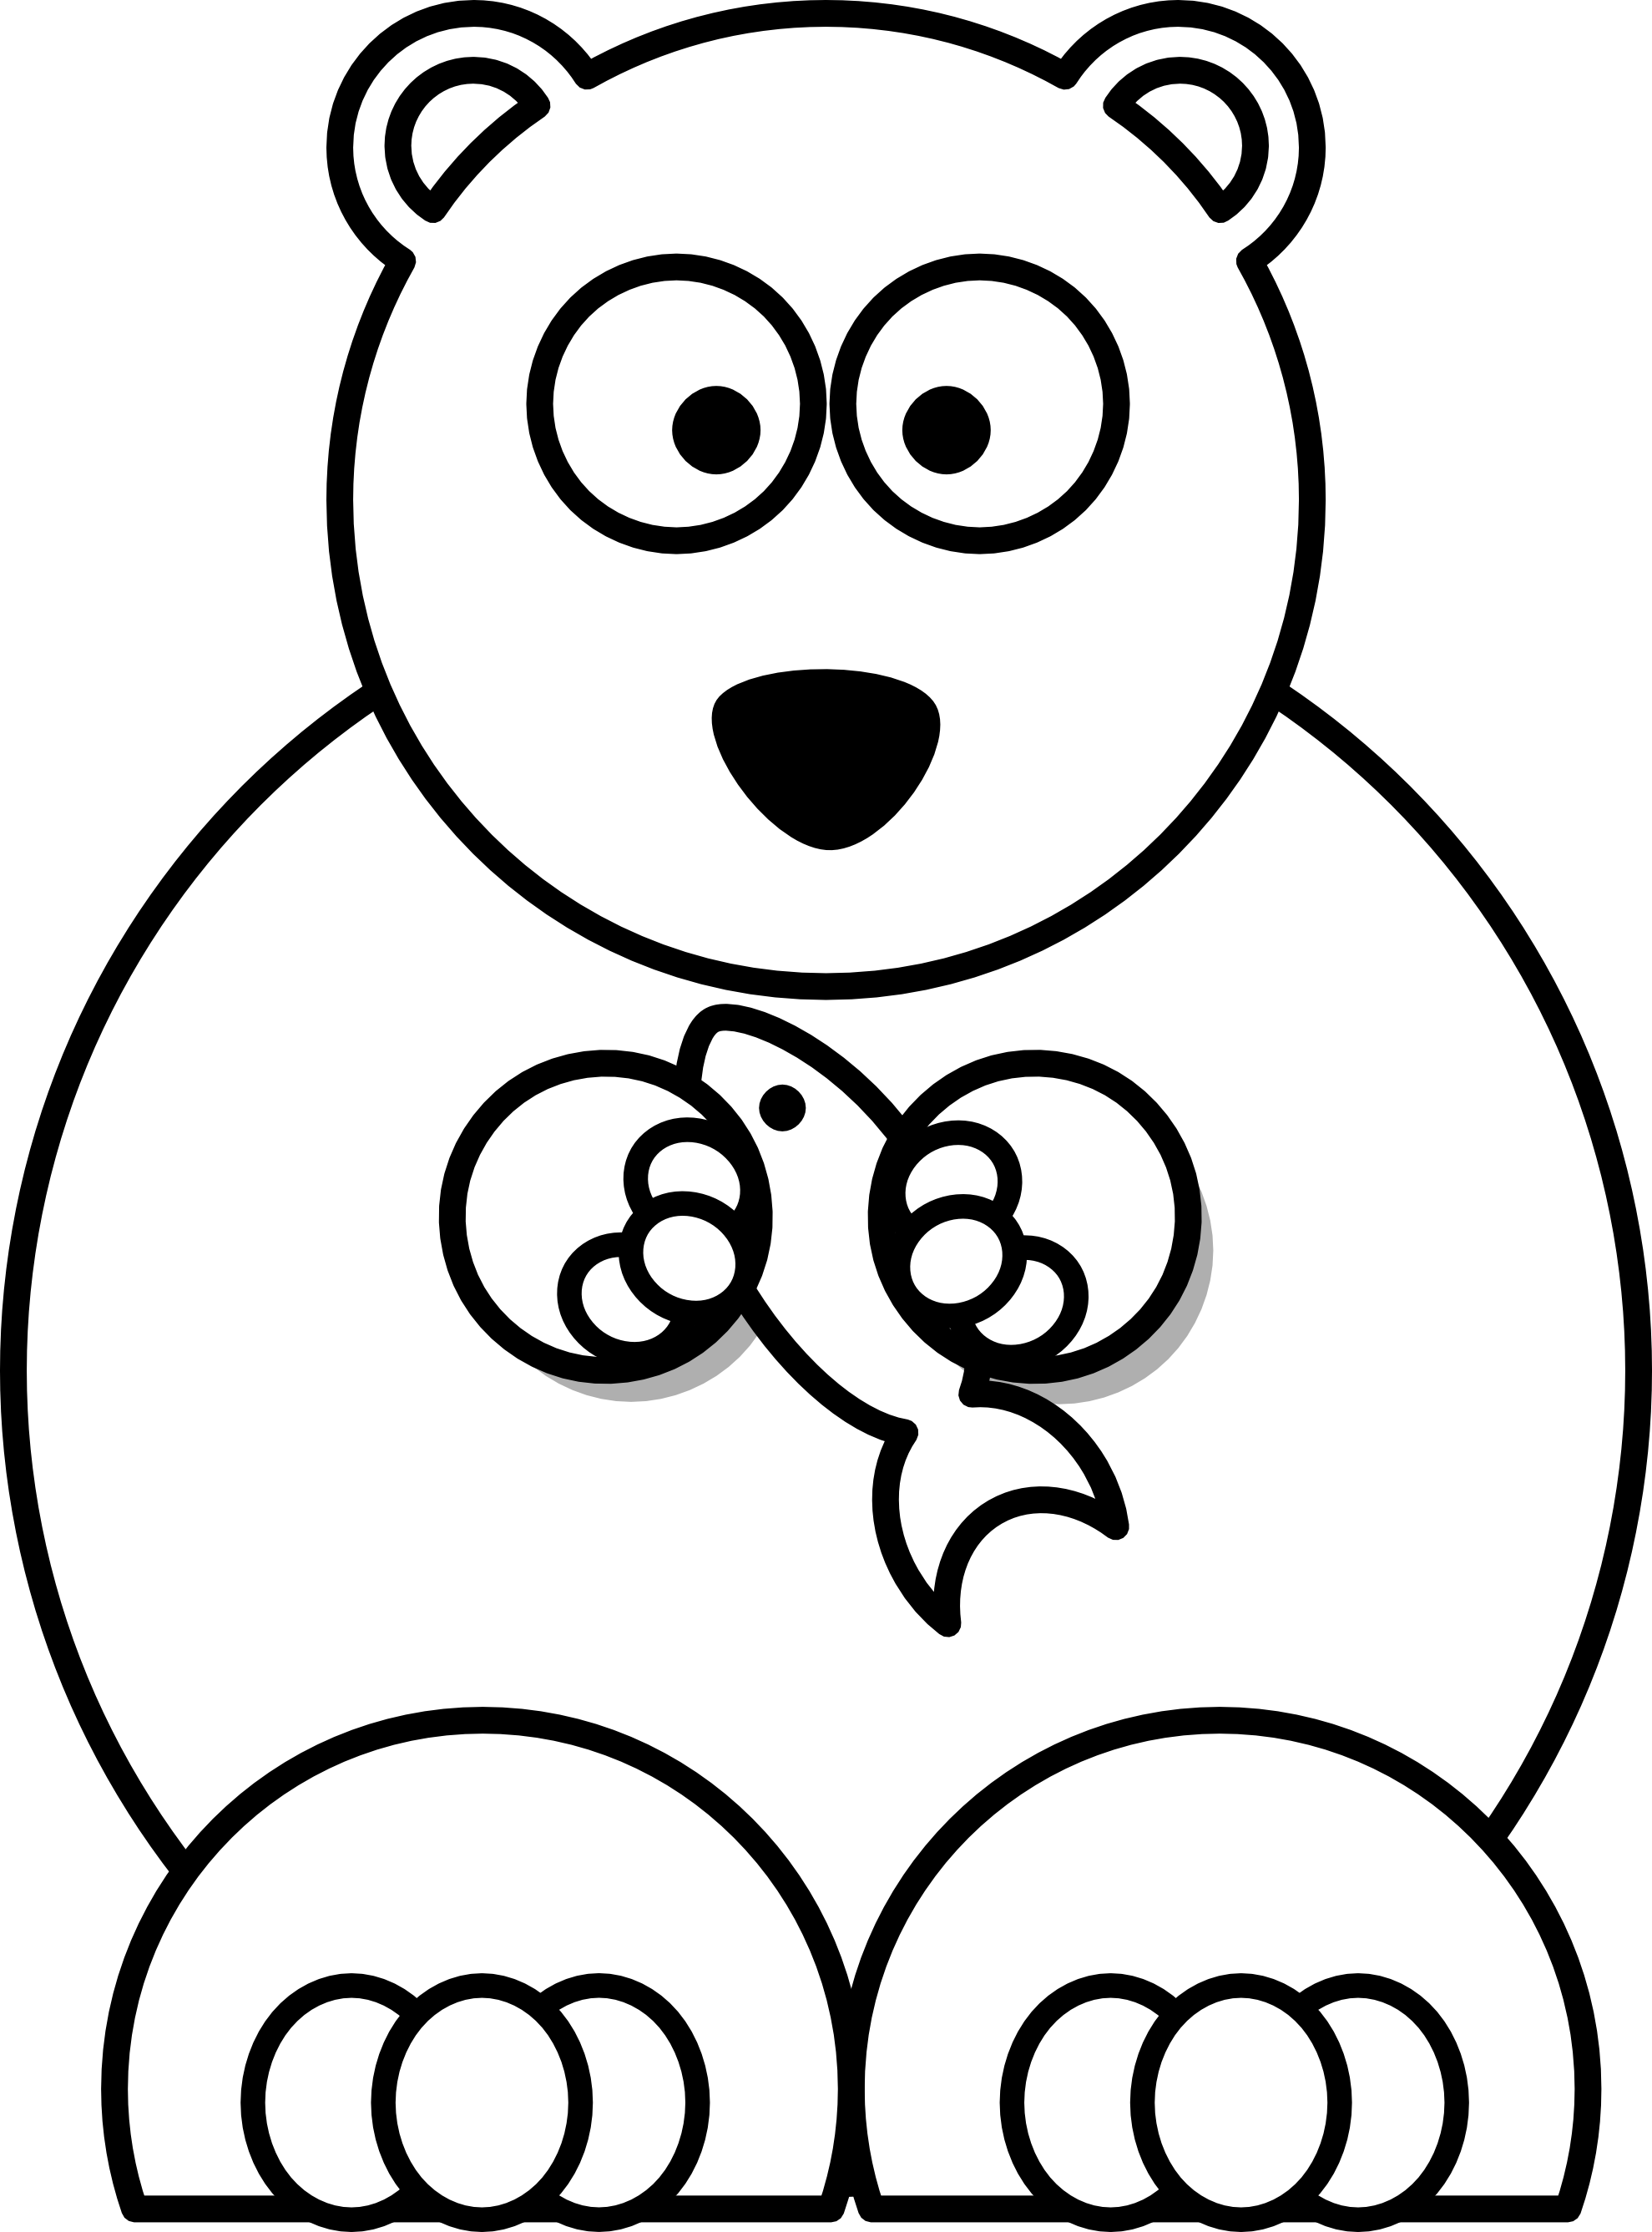 Teddy bear  black and white teddy bear black and white clipart 4